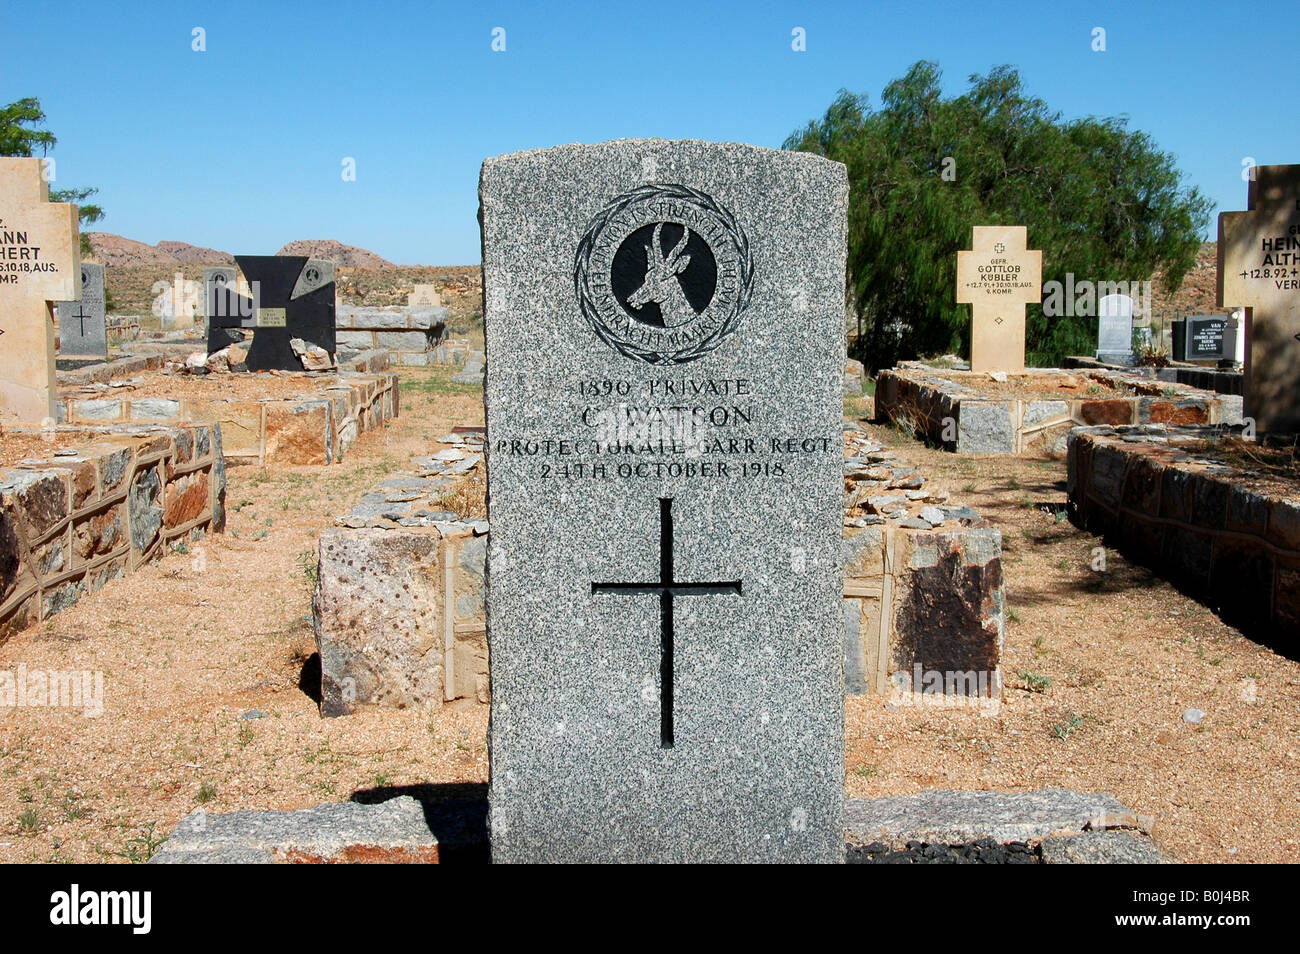 Military Grave World War One Killed In Action at Aus military graveyard, German South West Africa. Namibia. Stock Photo